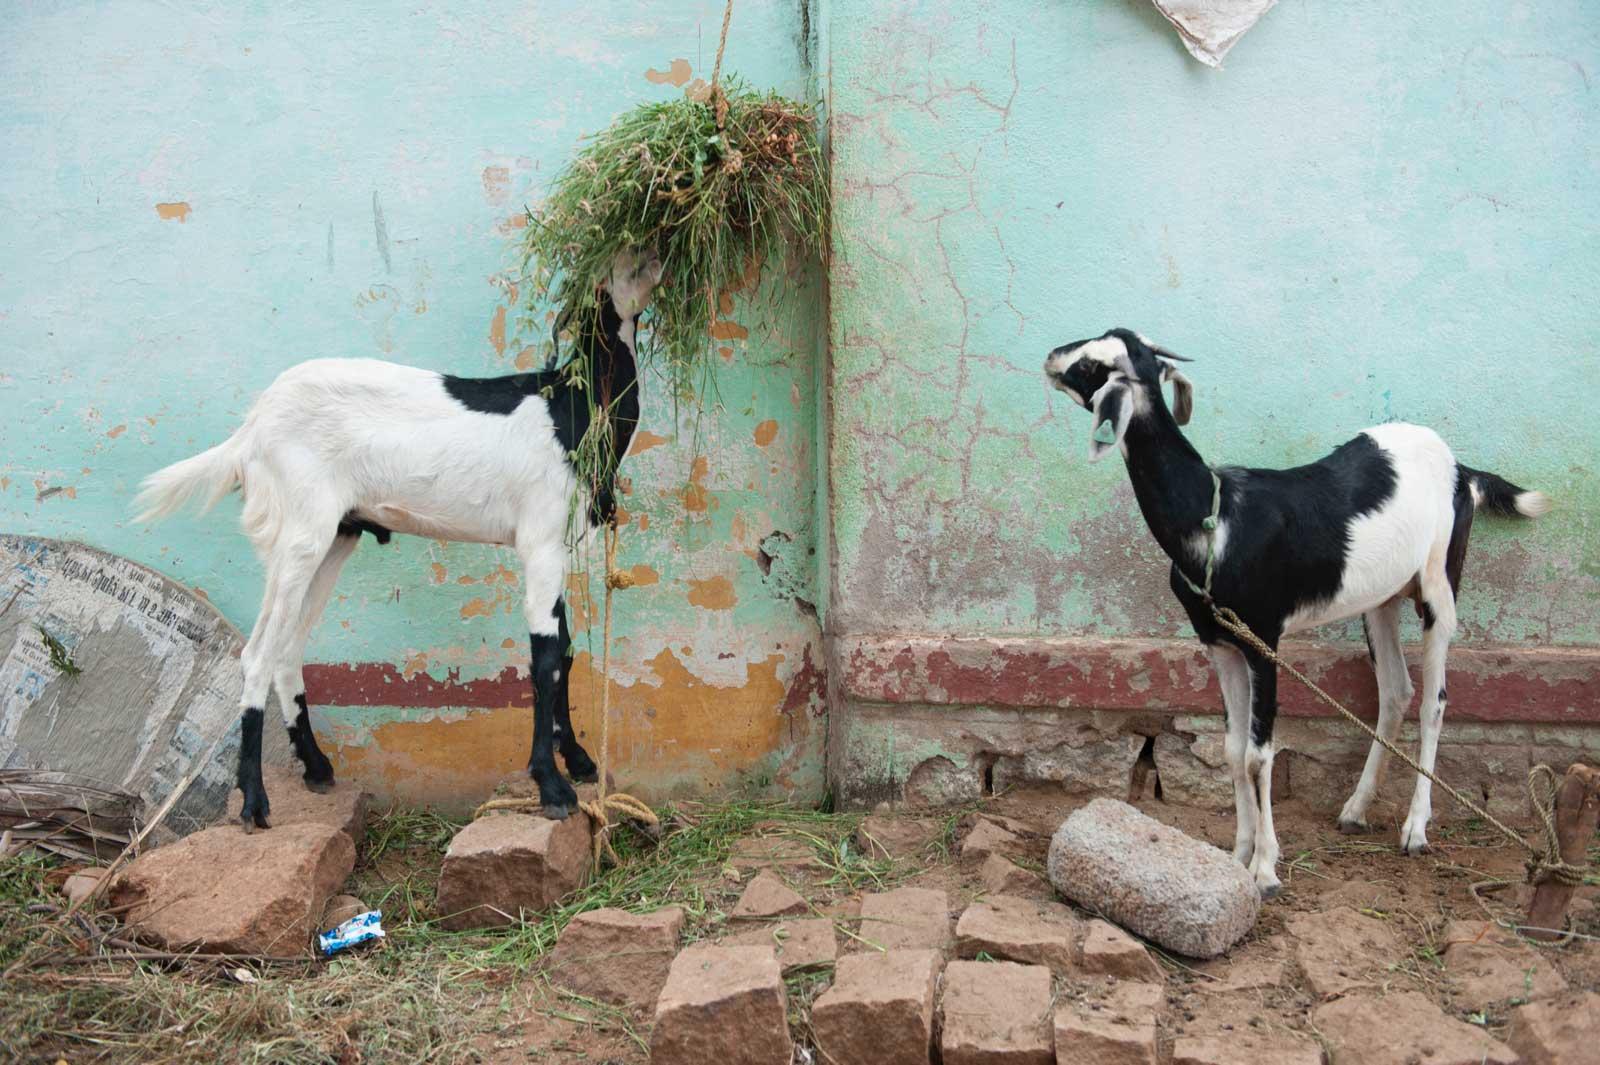 Two goats hanging out